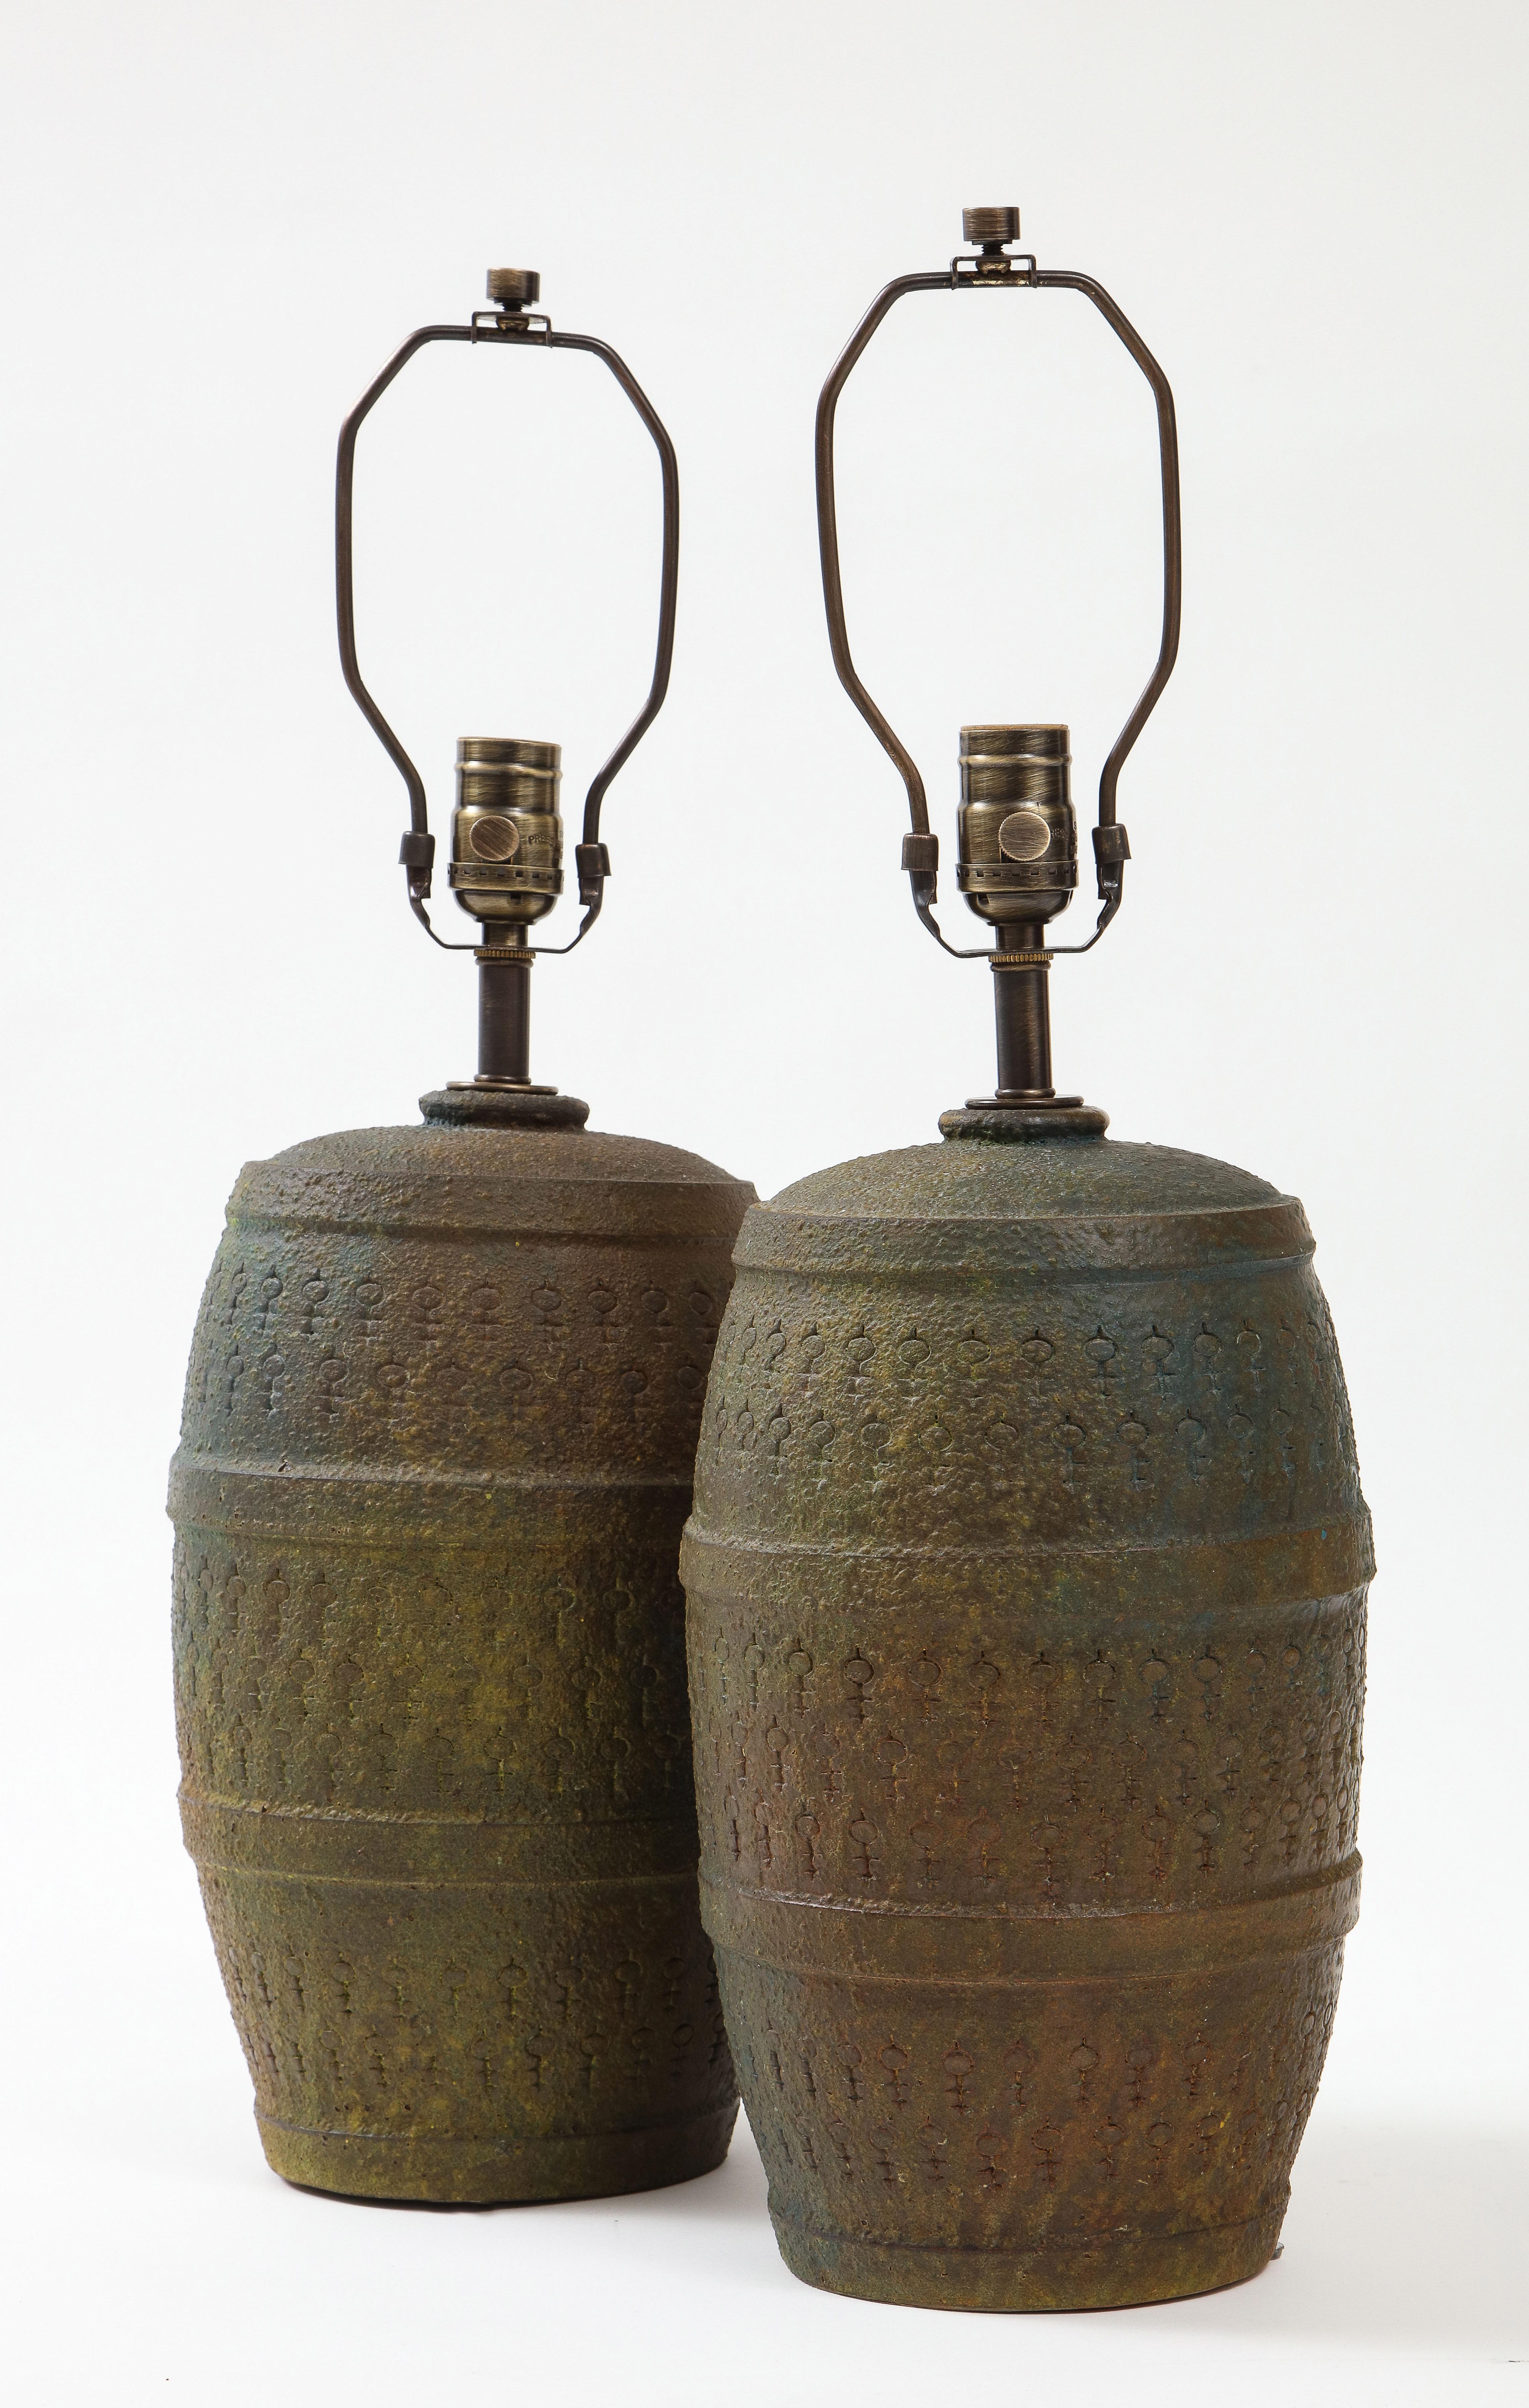 Pair of Italian Mid-Century Modern matte dark green/loden glazed barrel form ceramic lamps. Lamps feature a hand incised all over stylized key pattern. Signed. Rewired for use in the USA using dark brown silk cord and new bronze sockets, 100W max